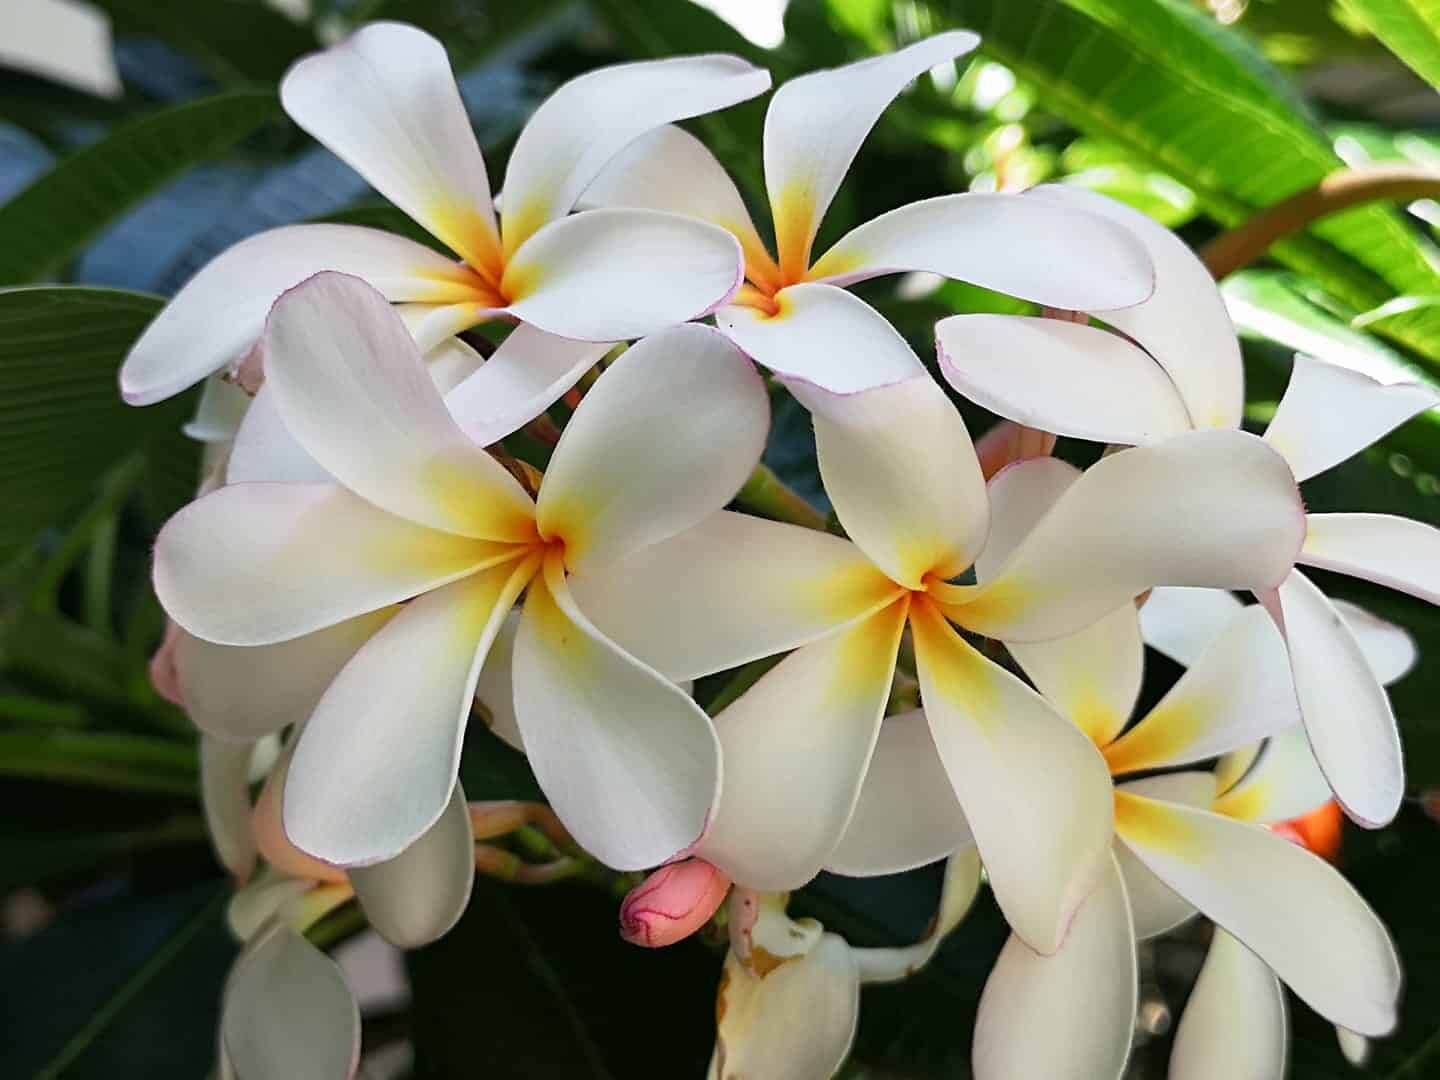 Aloha Friday Photo: Our hope will bloom edition - Go Visit Hawaii